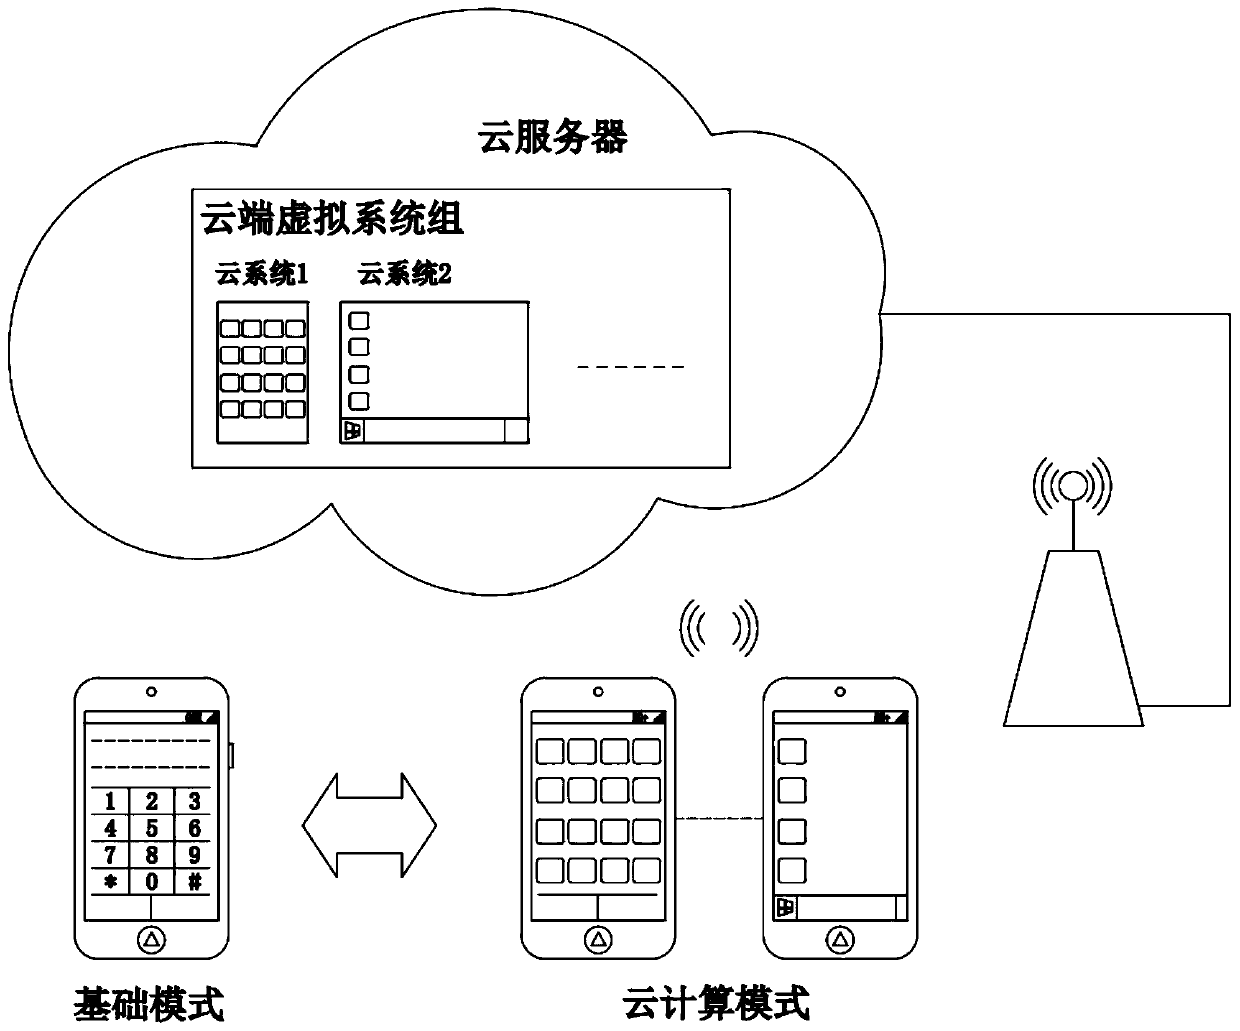 A method for controlling the operation of cloud computing terminals and cloud servers